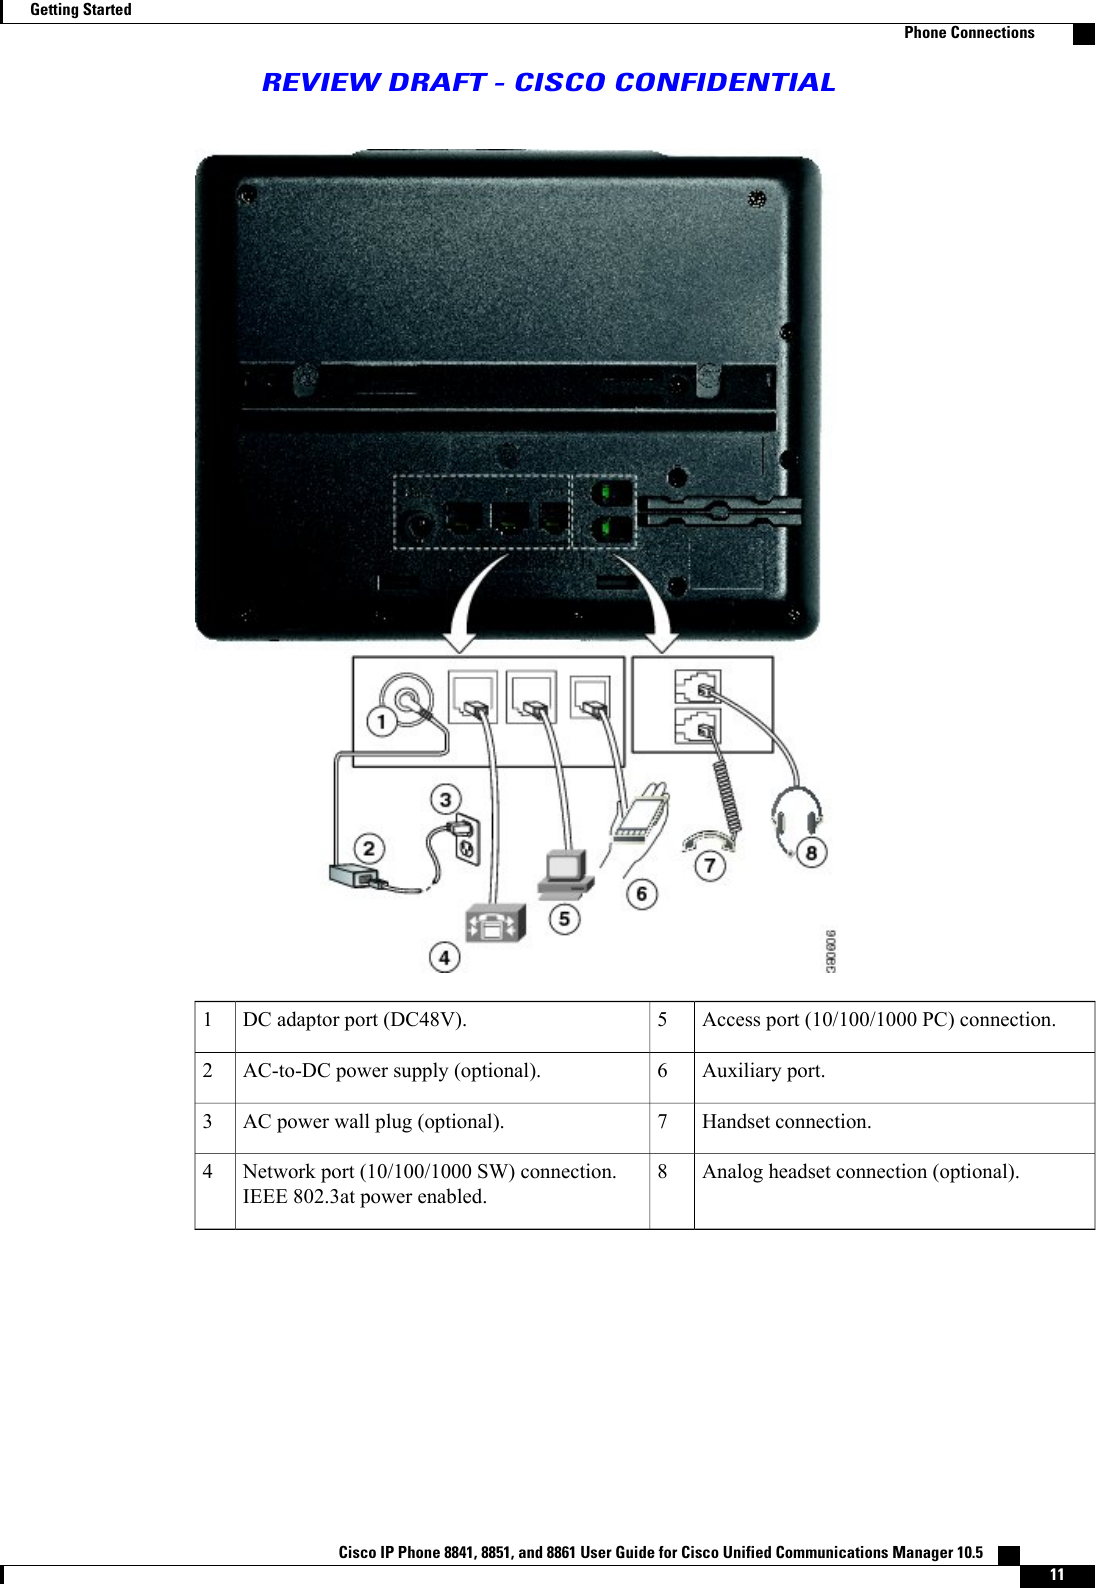 Access port (10/100/1000 PC) connection.5DC adaptor port (DC48V).1Auxiliary port.6AC-to-DC power supply (optional).2Handset connection.7AC power wall plug (optional).3Analog headset connection (optional).8Network port (10/100/1000 SW) connection.IEEE 802.3at power enabled.4Cisco IP Phone 8841, 8851, and 8861 User Guide for Cisco Unified Communications Manager 10.5    11Getting StartedPhone ConnectionsREVIEW DRAFT - CISCO CONFIDENTIAL